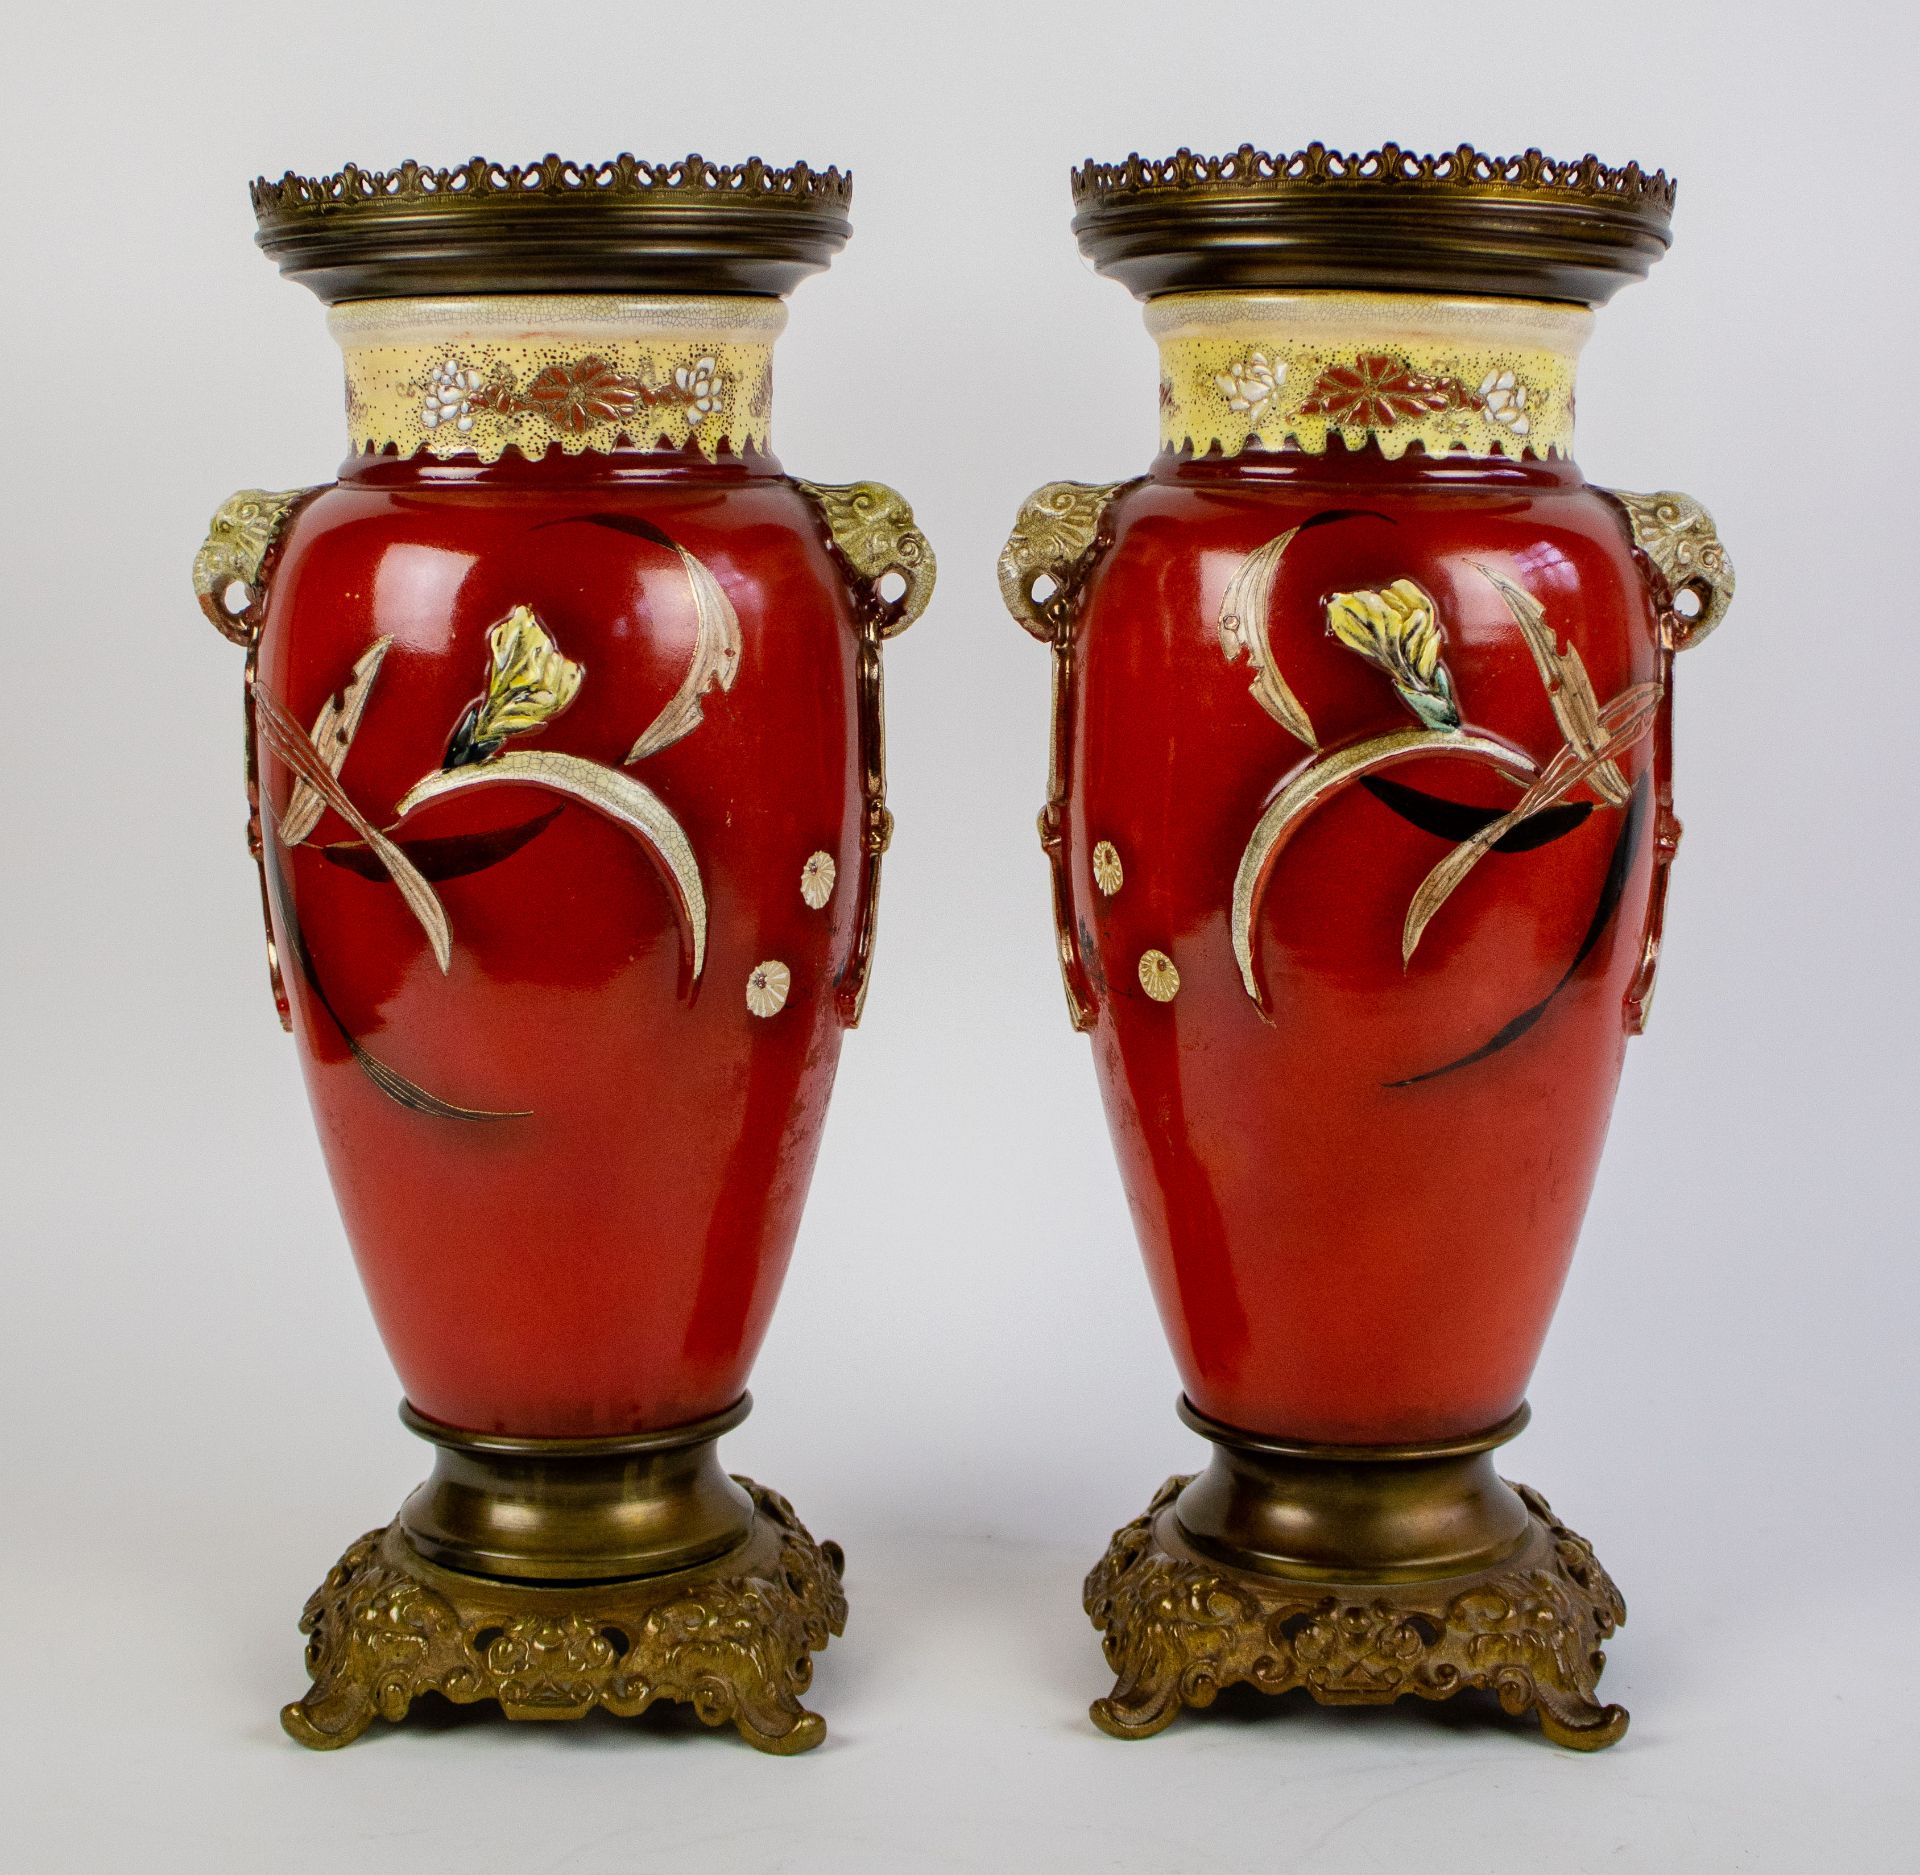 Pair of Japanese vases on a bronze feet